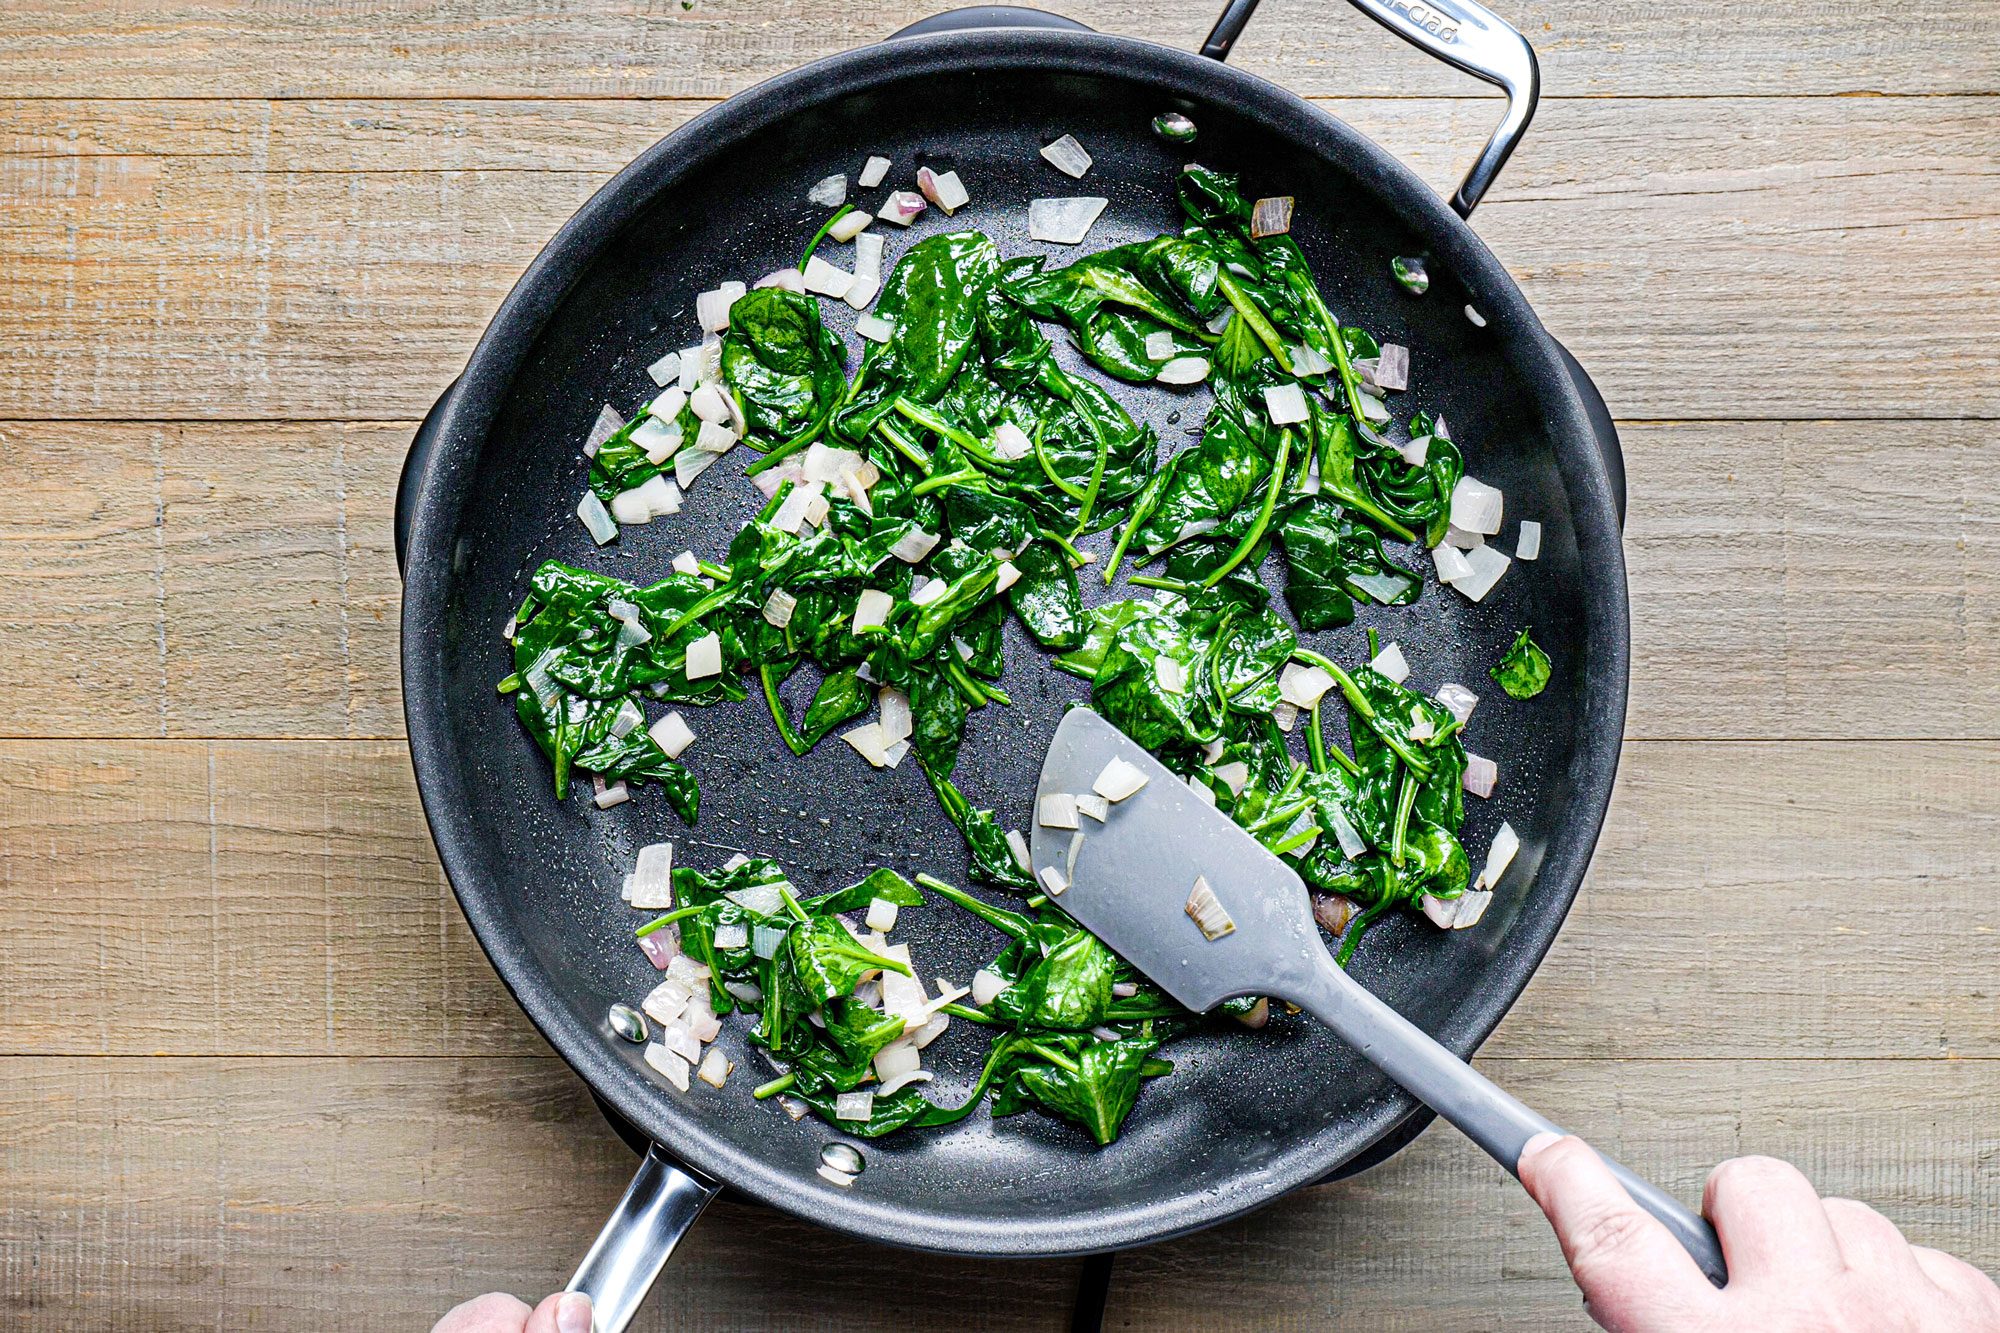 Stir in the spinach and cook until wilted in a large skillet